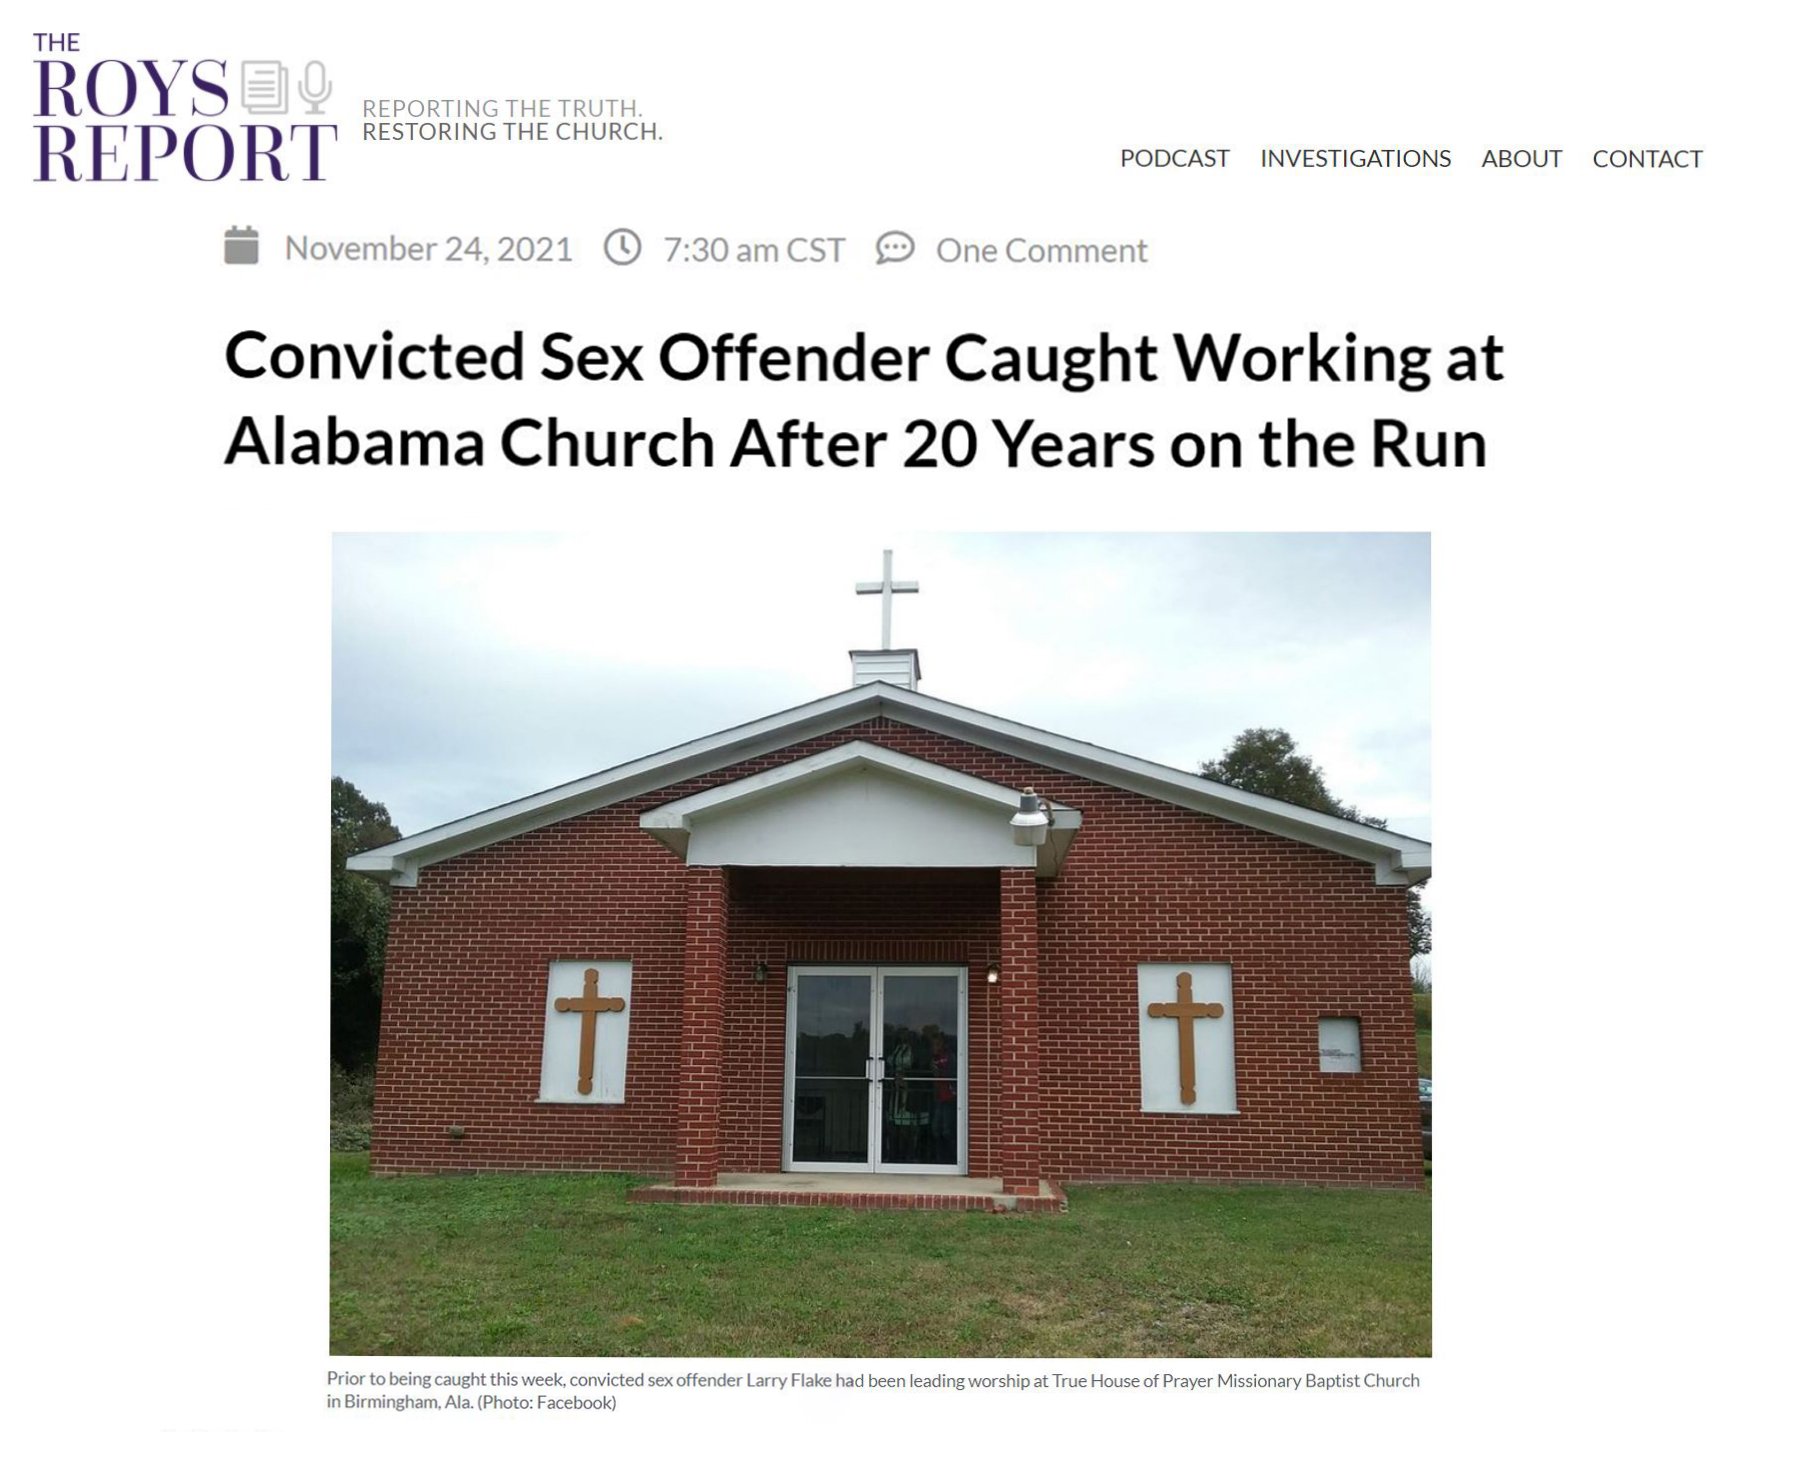 CONVICTED SEX OFFENDER AB CHURCH.jpg